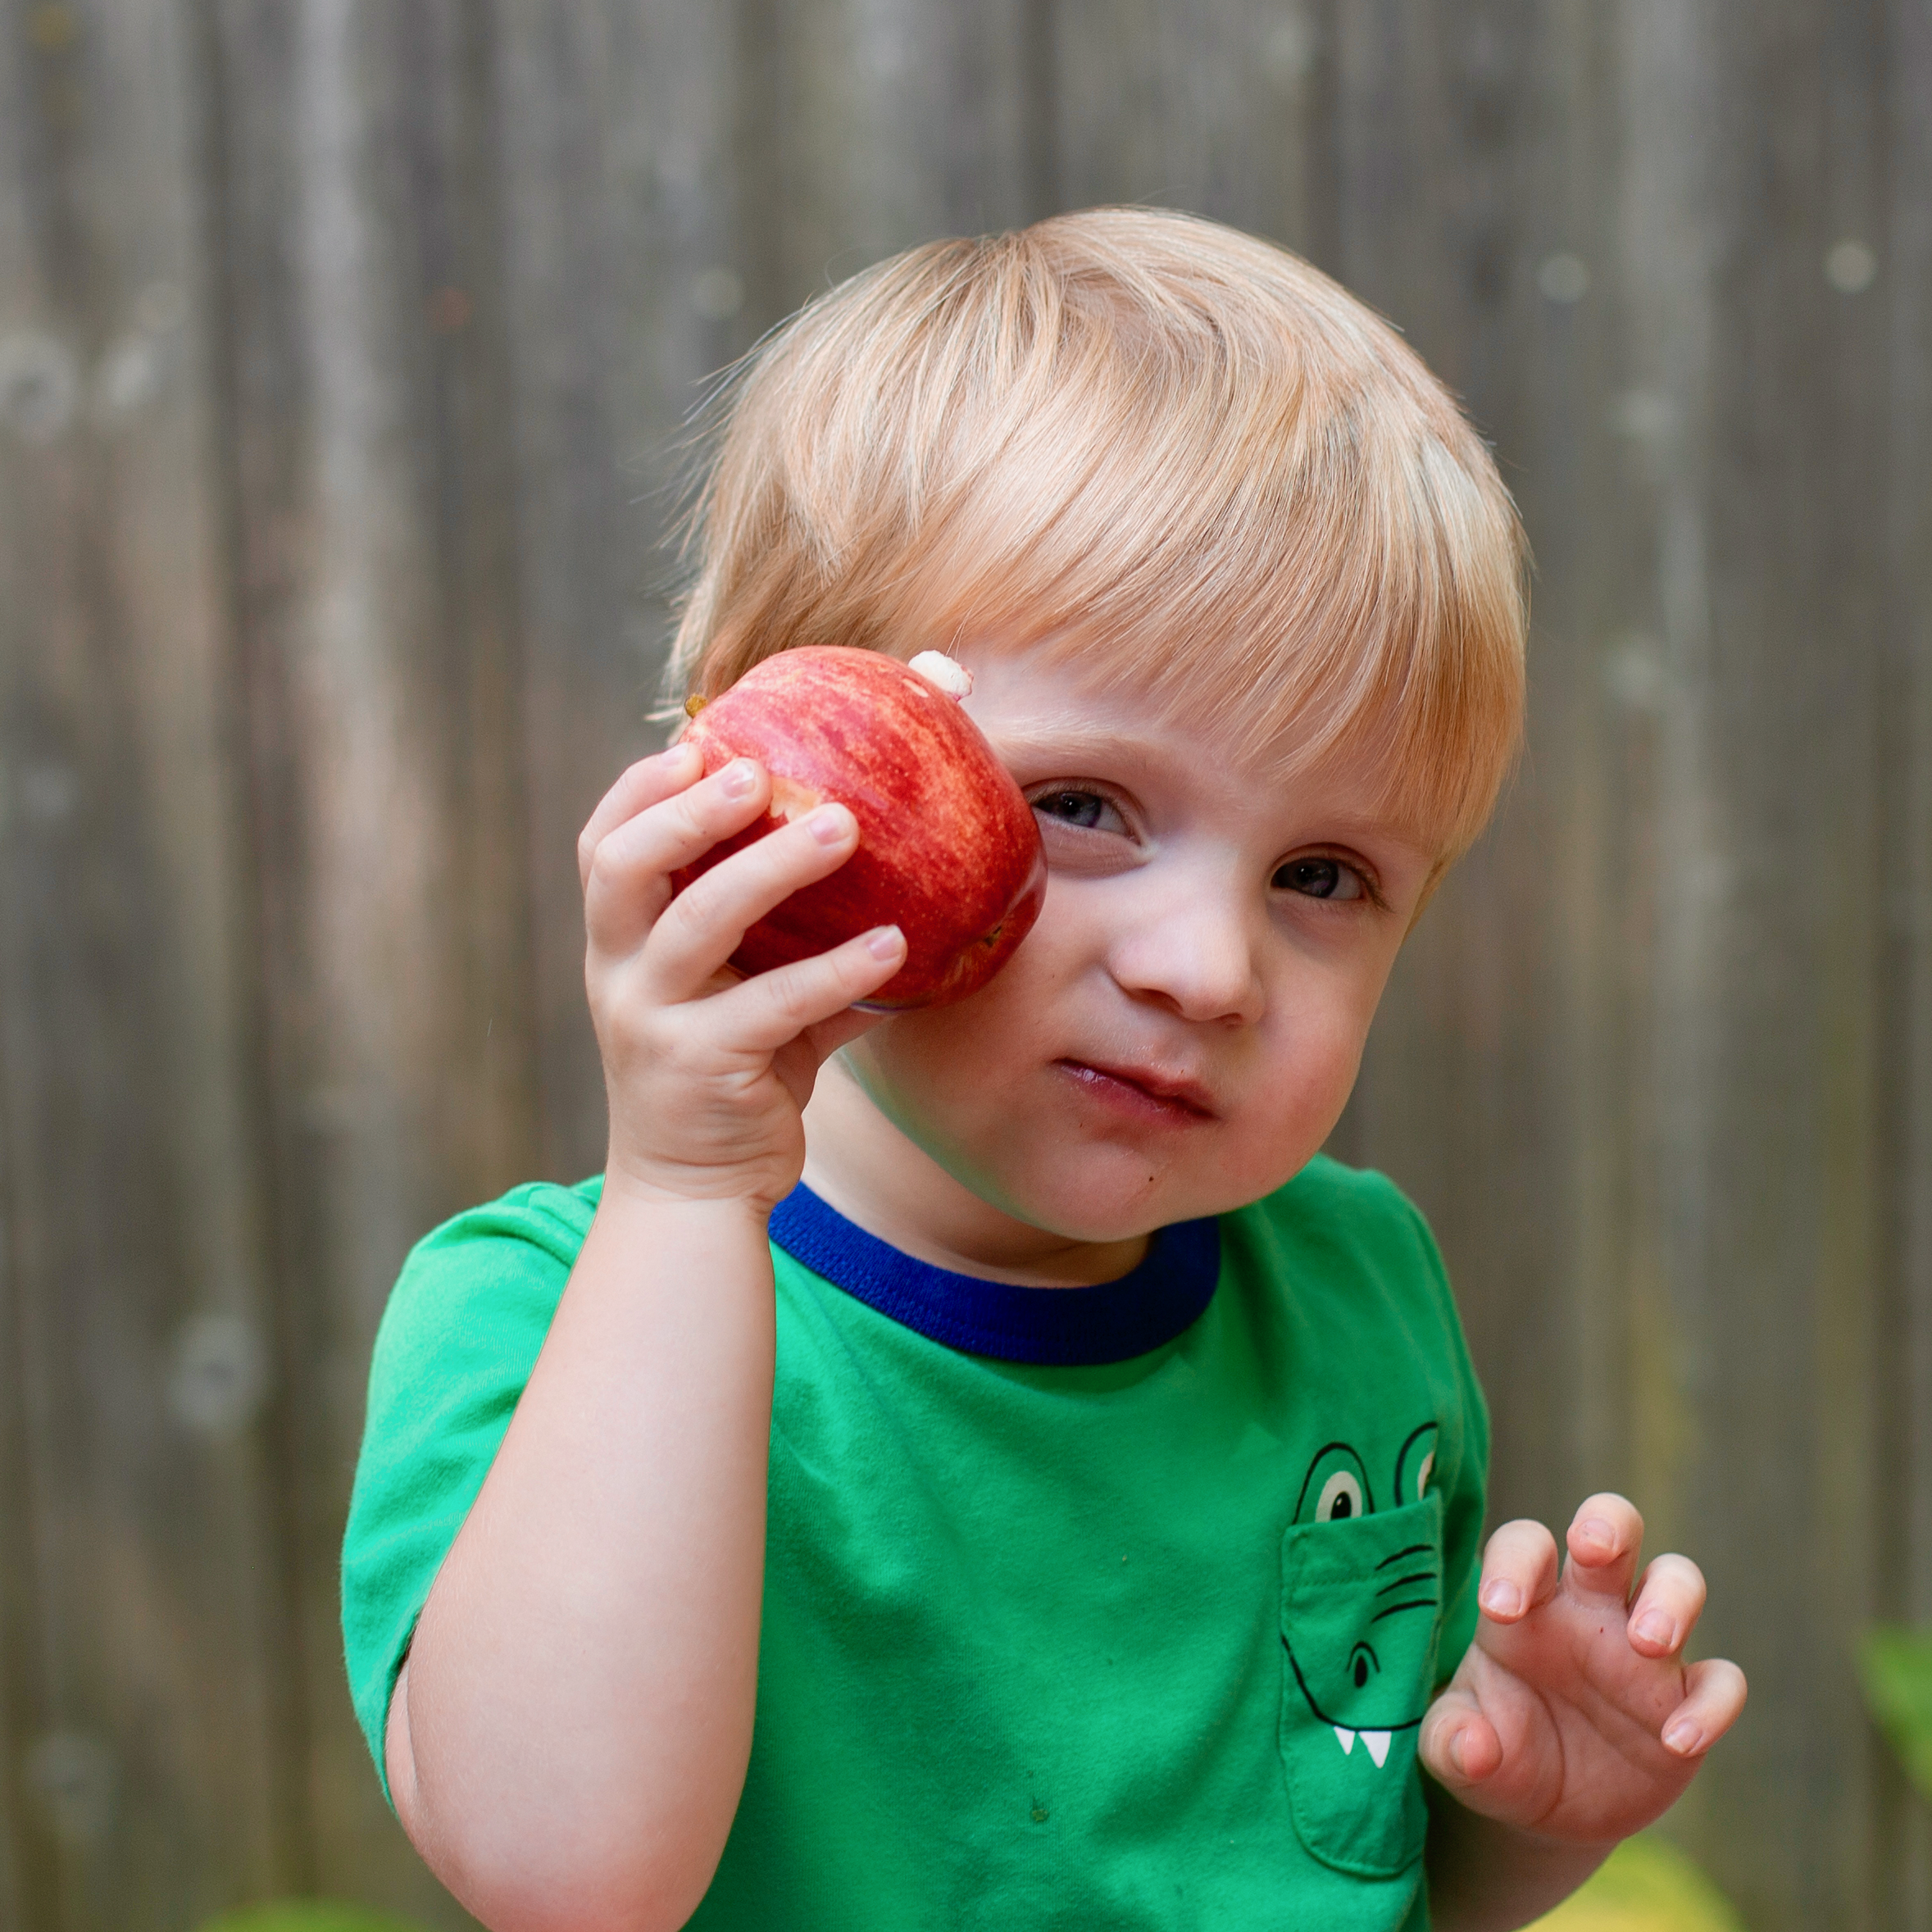 Young boy eating a red apple